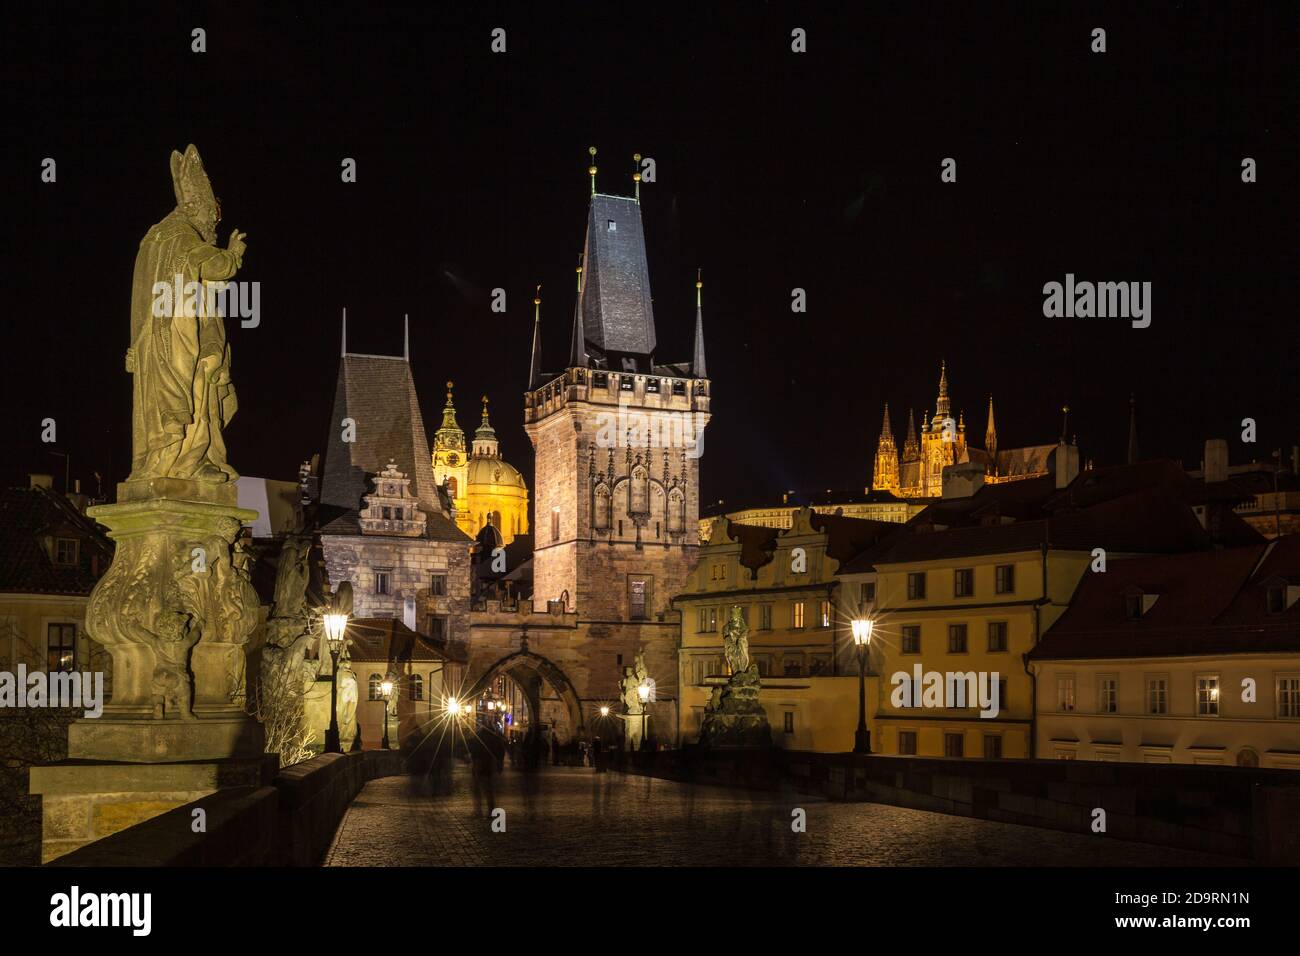 Beautiful night view of the light illuminated Prague Castle and St. Vitus Cathedral in Mala Strana old town by Vltava River from Charles Bridge, Pragu Stock Photo